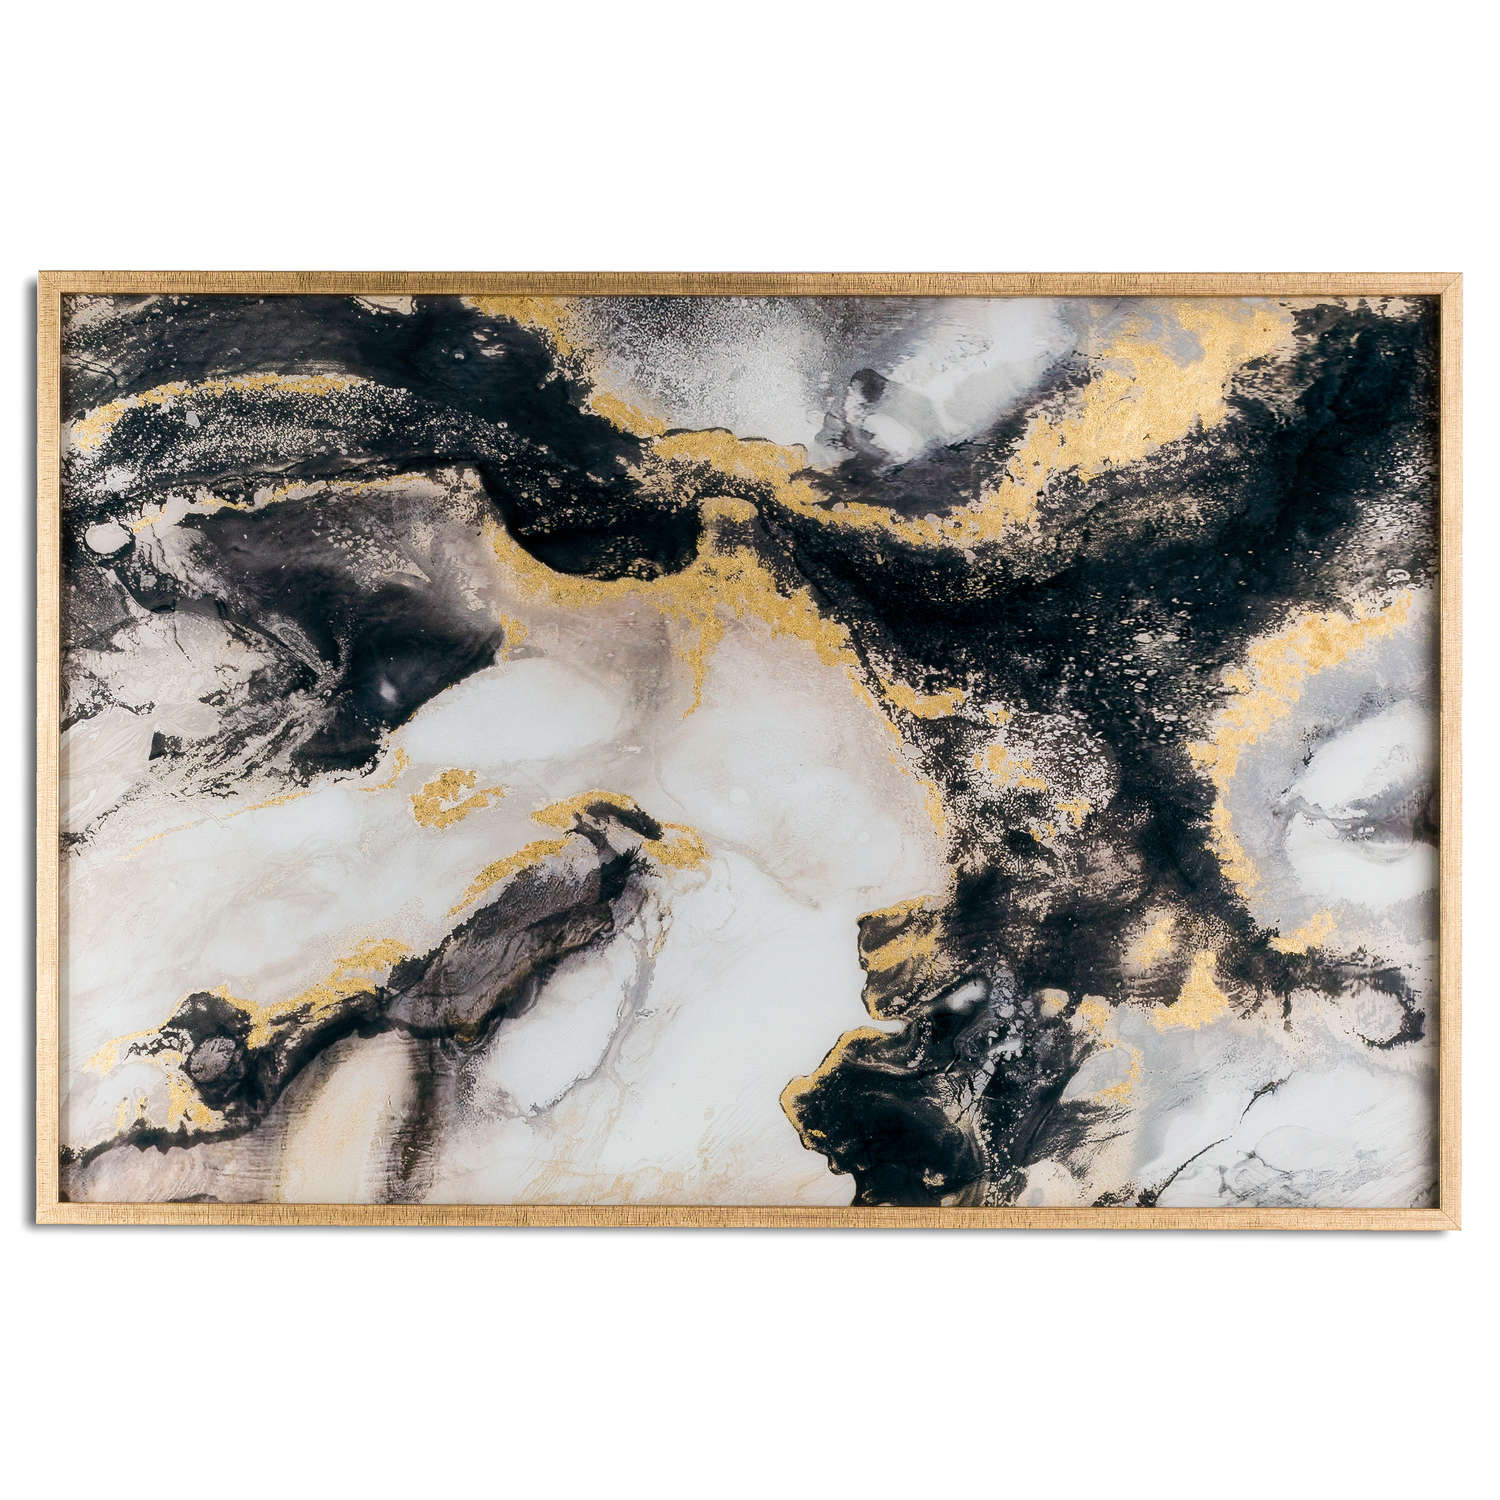 Marble Effect Black And Gold Glass Image In Gold Frame - Image 1